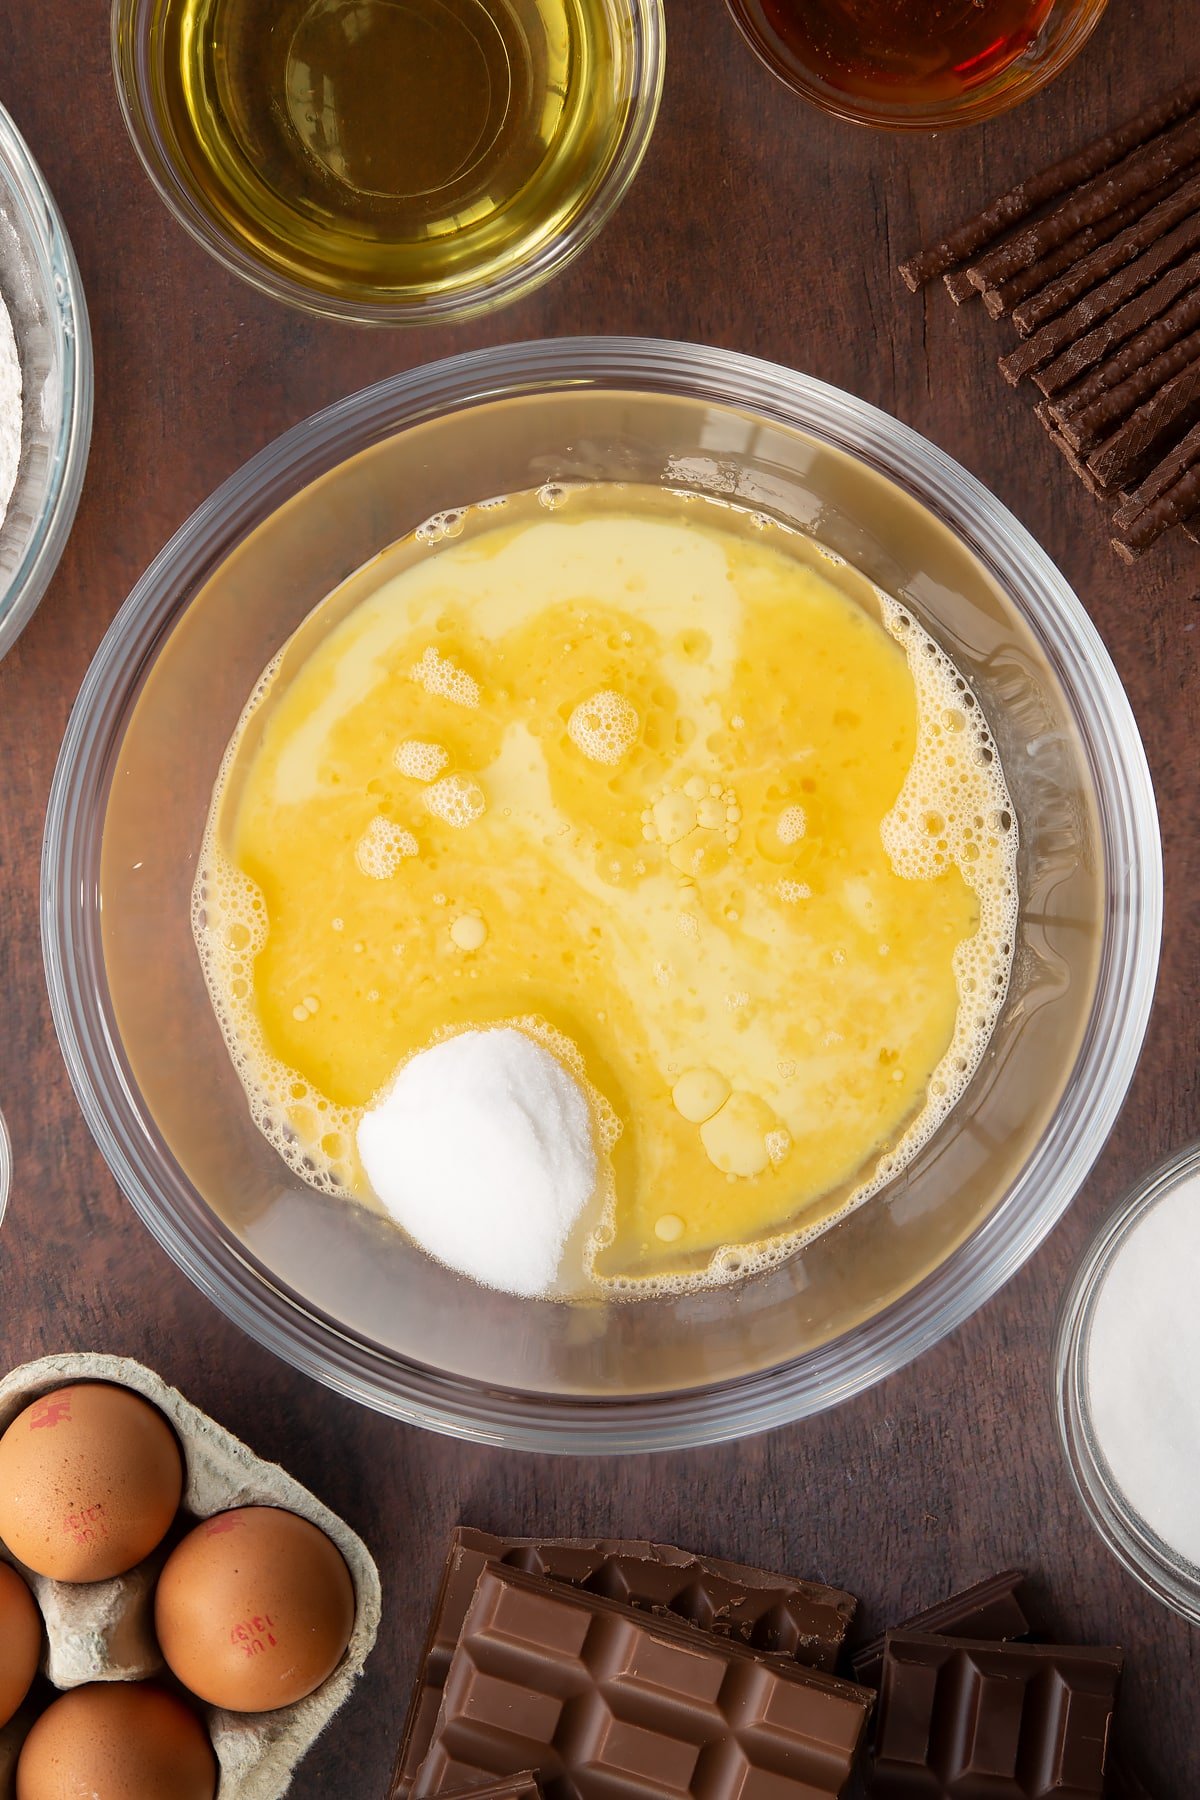 Sugar, beaten eggs, oil, milk and golden syrup in a glass mixing bowl. Ingredients to make Matchmaker cake surround the bowl. 